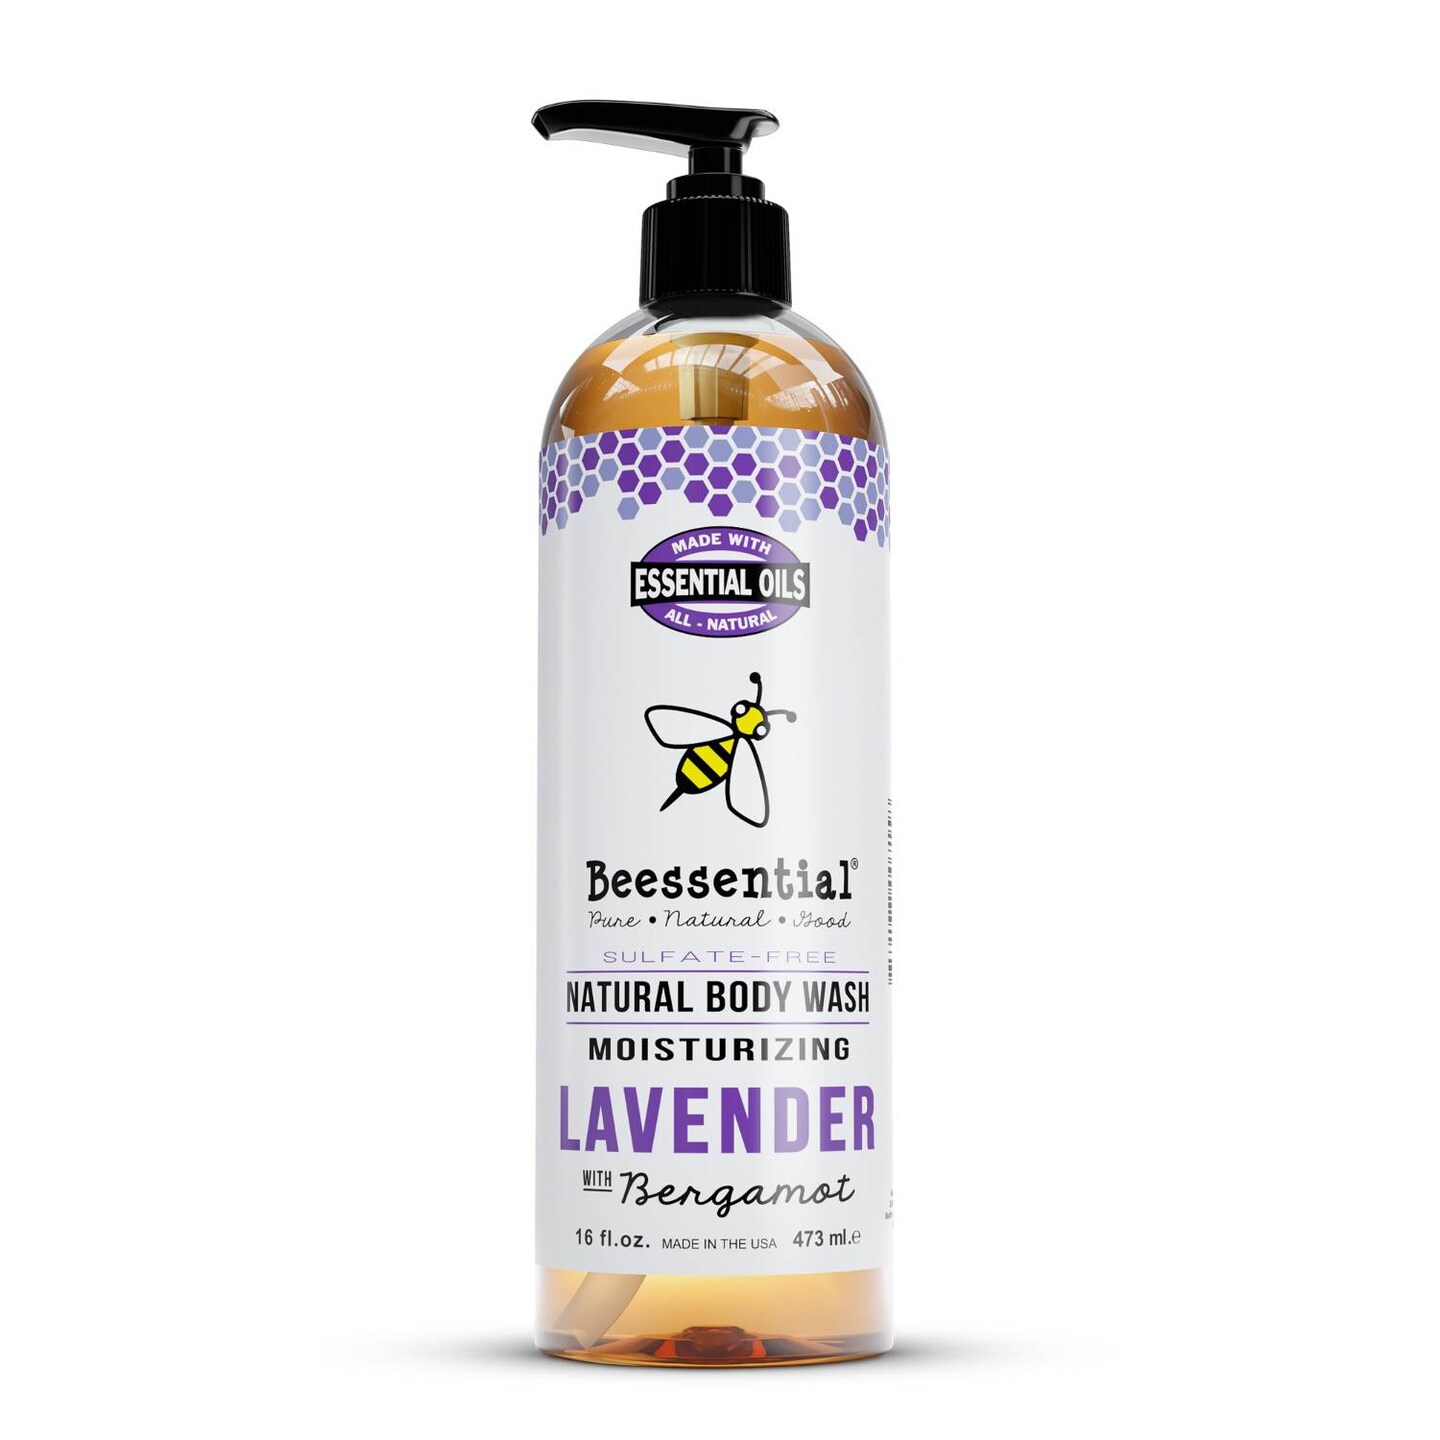 Beessential Natural Body Wash, Lavender, Sulfate-Free Bath and Shower Gel with Essential Oils for Men &#x26; Women, 16 oz